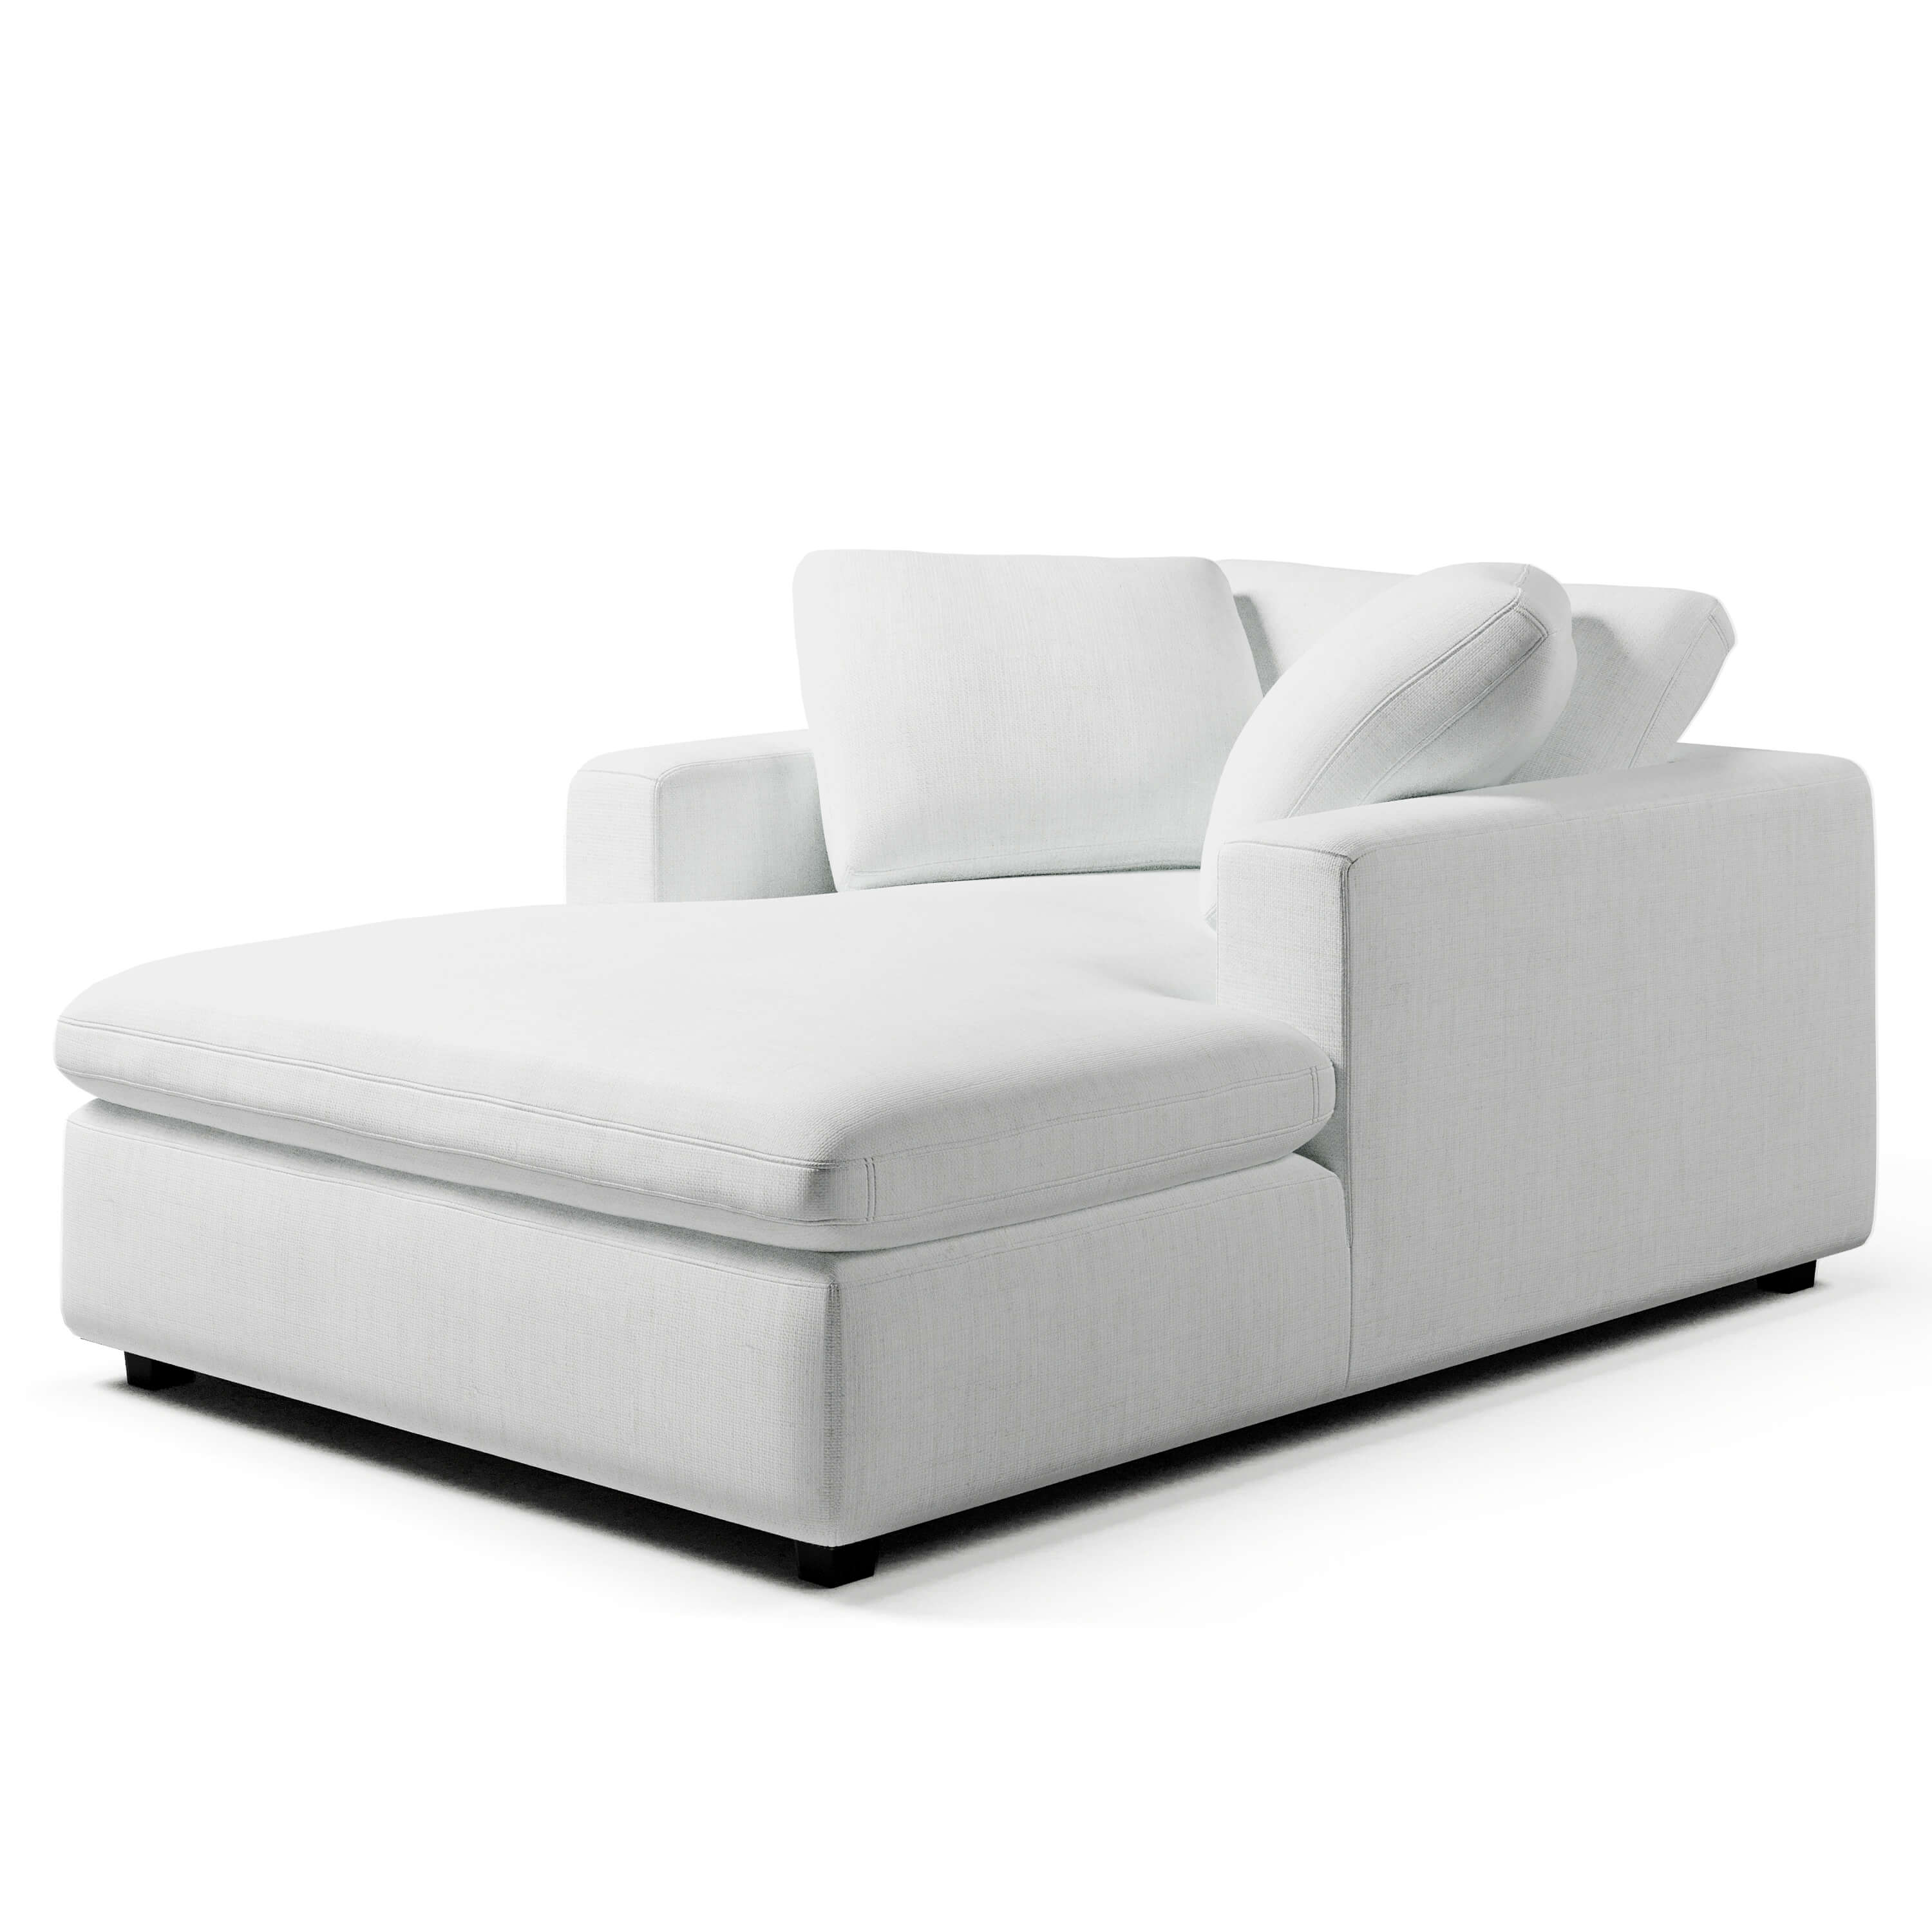 Comfy Chaise Lounge | Chaise Lounge Chair | Couch Haus